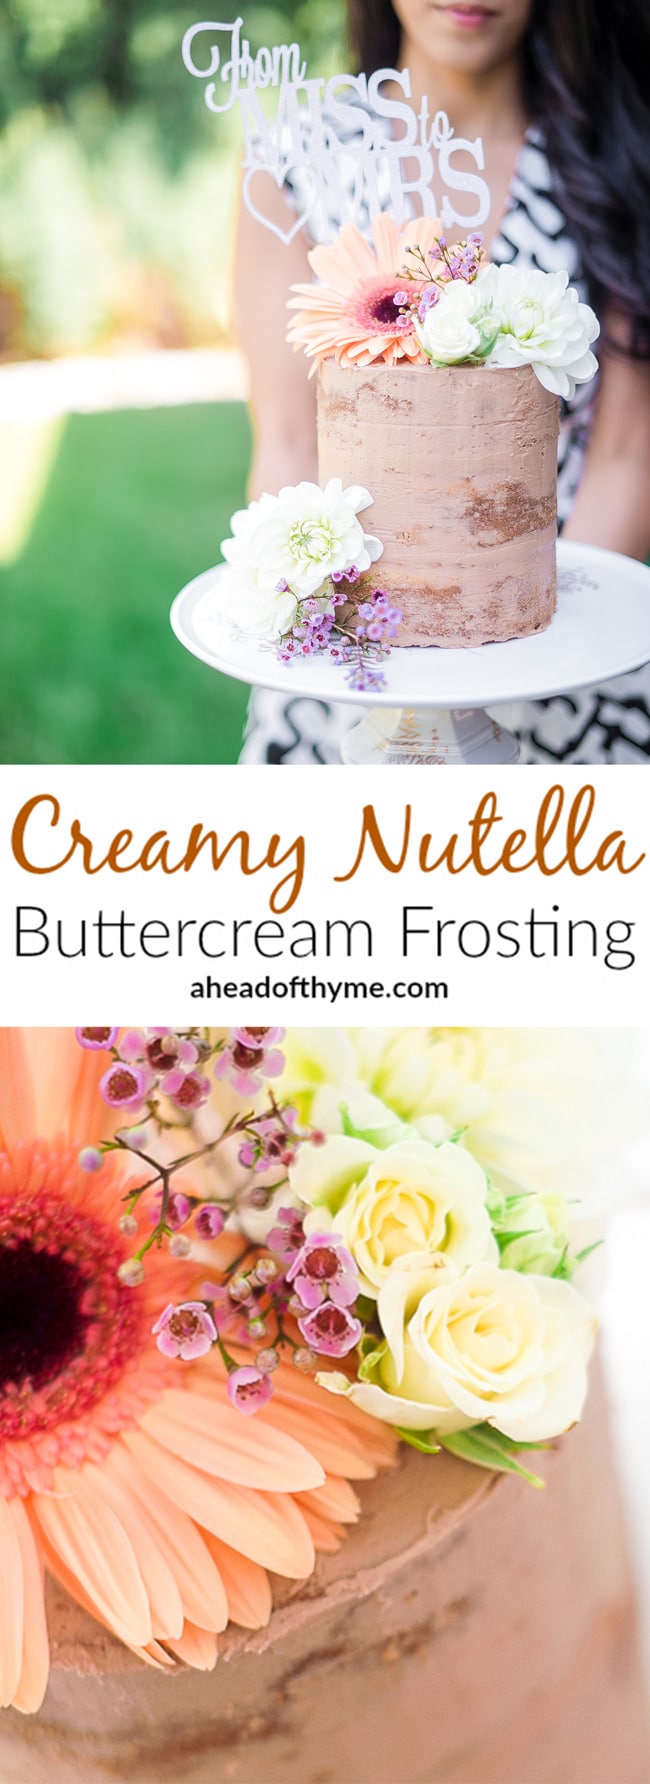 Creamy Nutella Buttercream Frosting: Decorate any cake or cupcake with this creamy Nutella buttercream frosting and turn your dessert into an exquisite and decadent masterpiece. | aheadofthyme.com